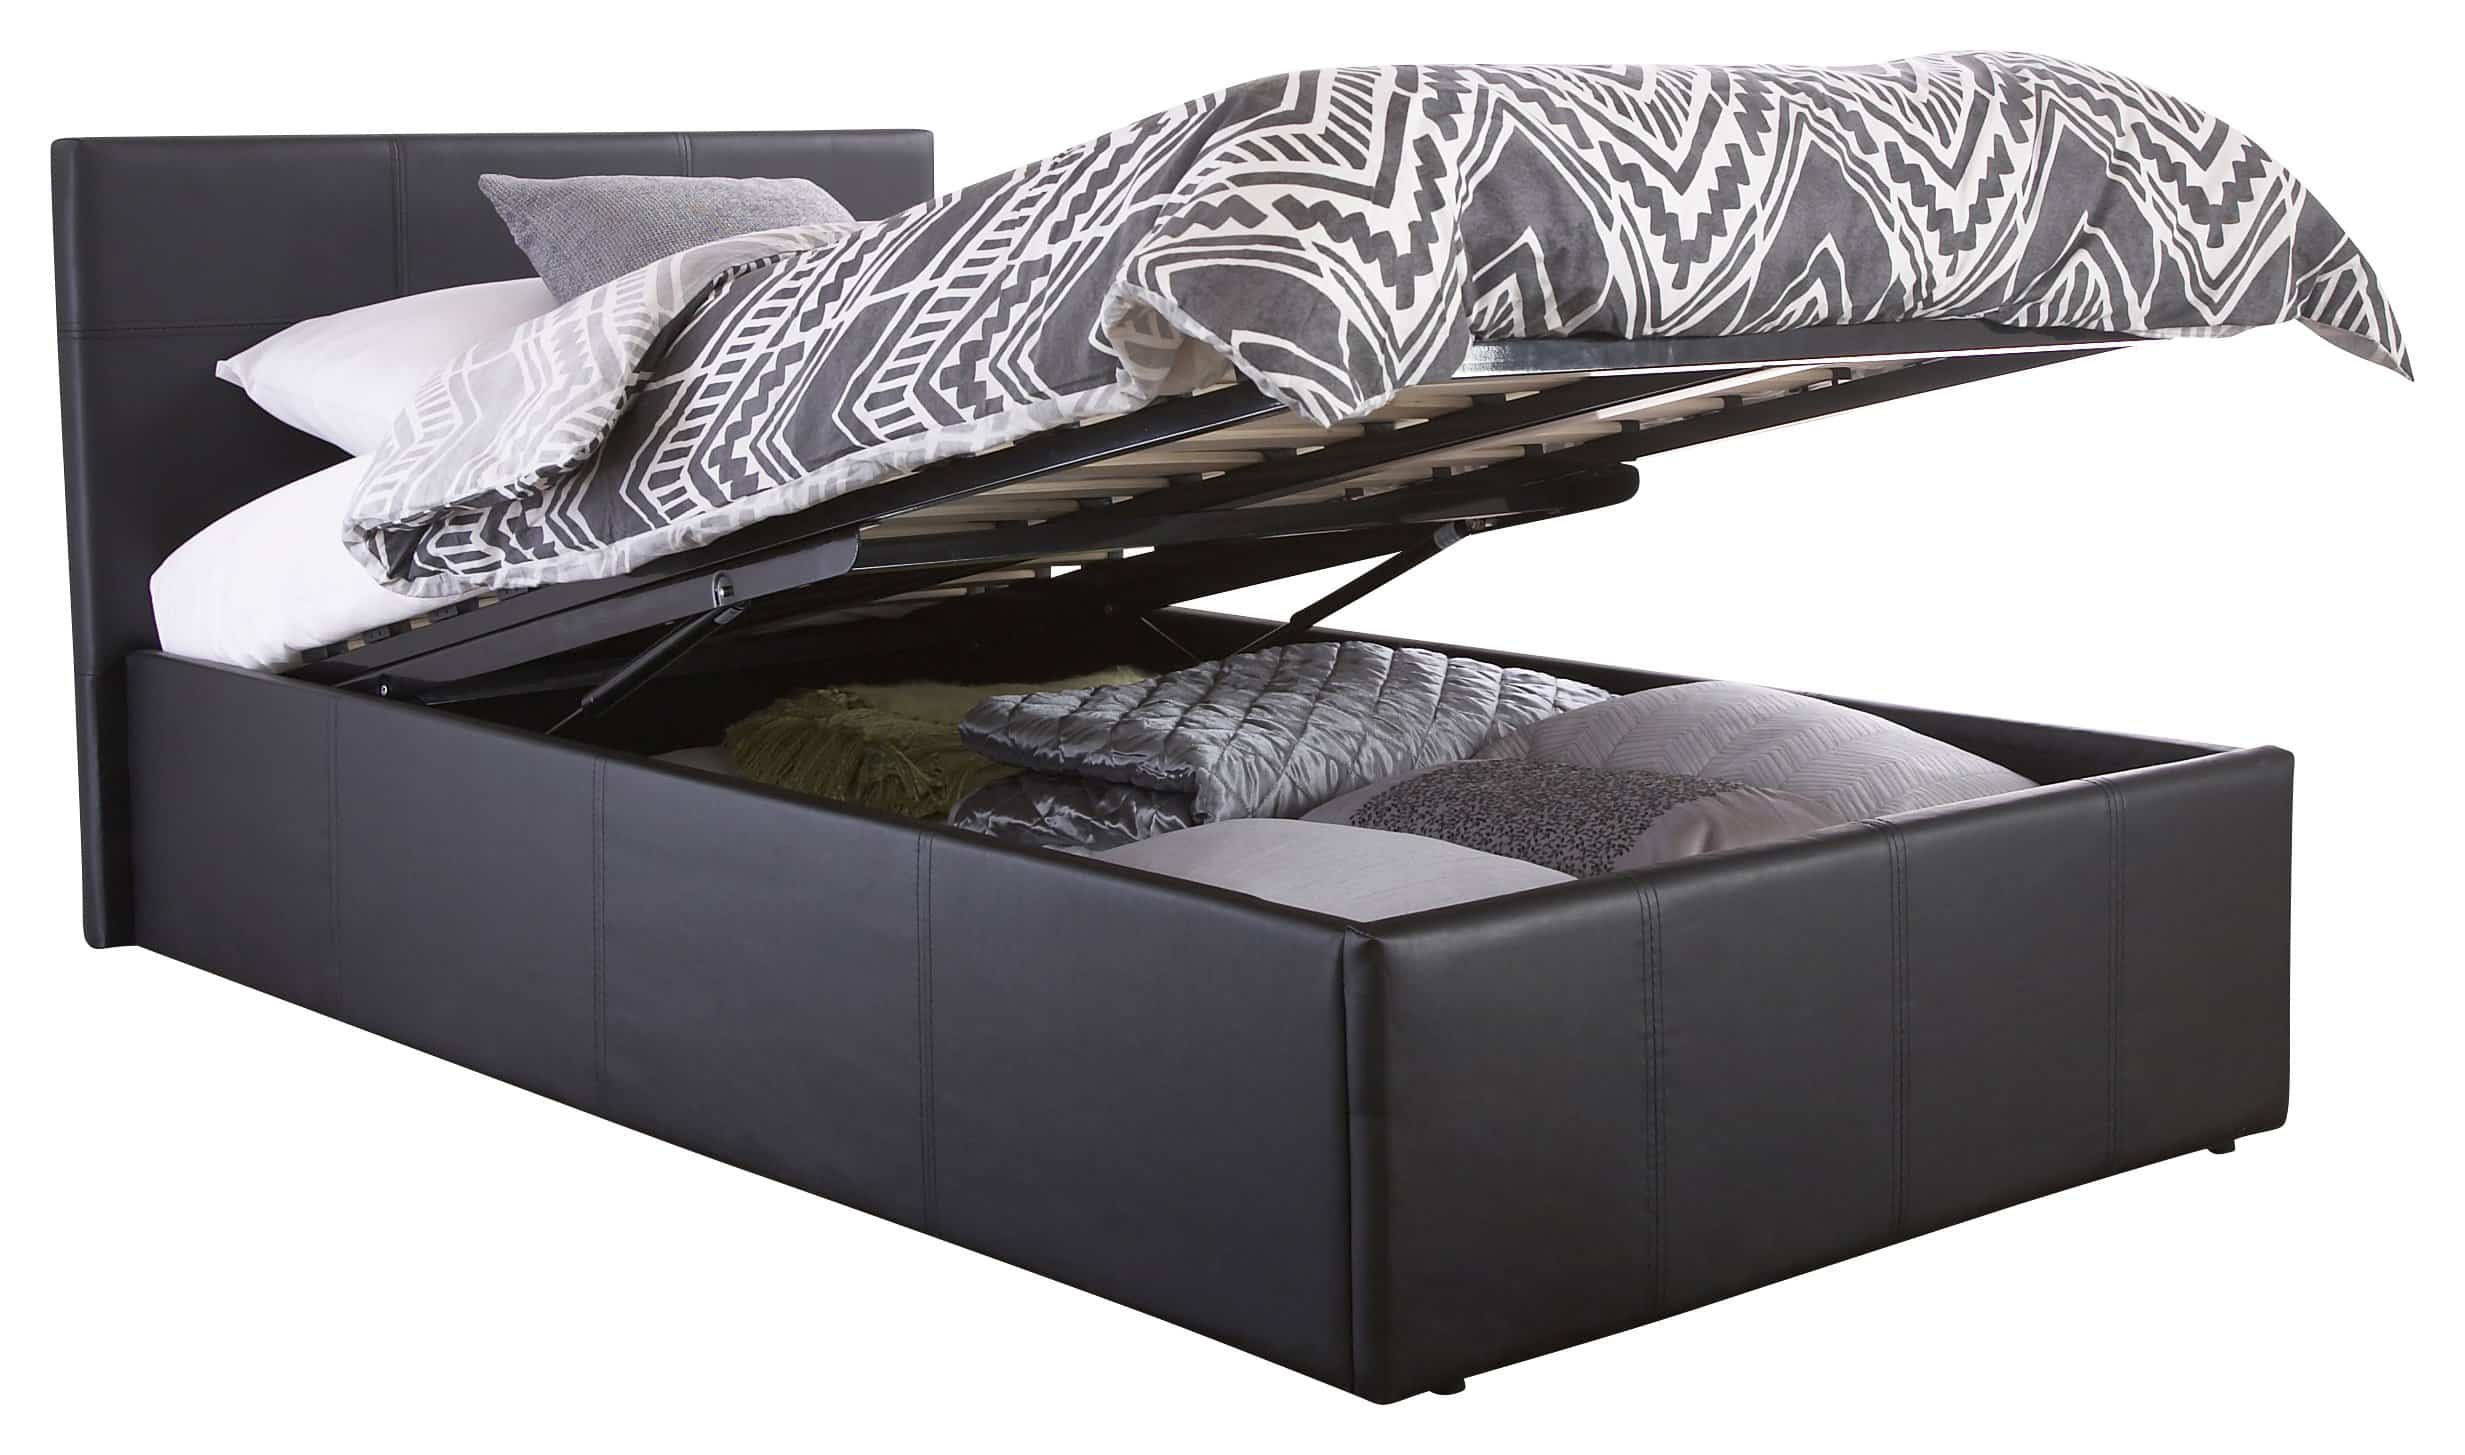 Right Deals UK SINGLE FAUX LEATHER OTTOMAN STORAGE GAS LIFT BED - BLACK